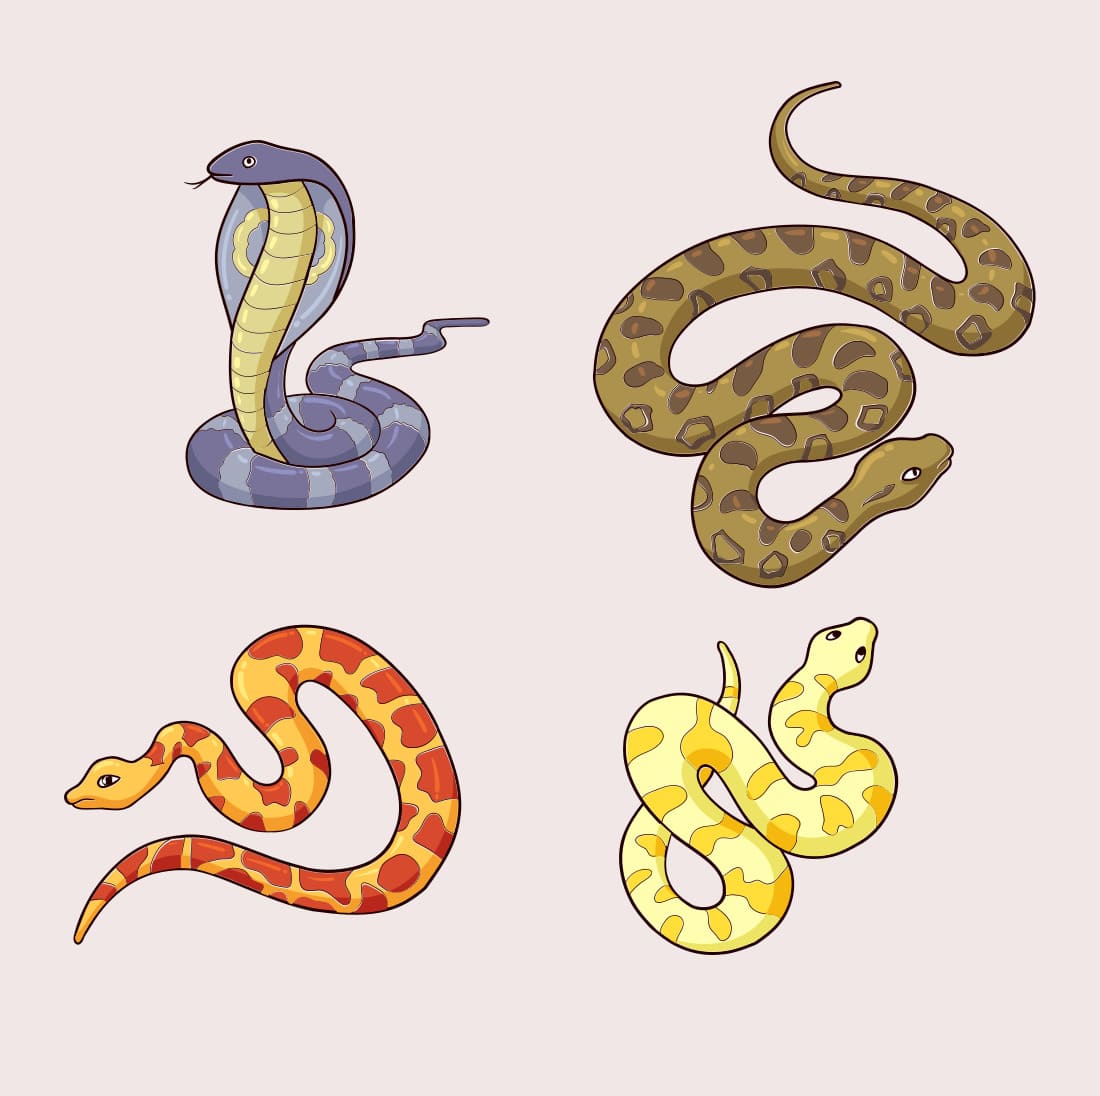 Four different types of snakes on a white background.